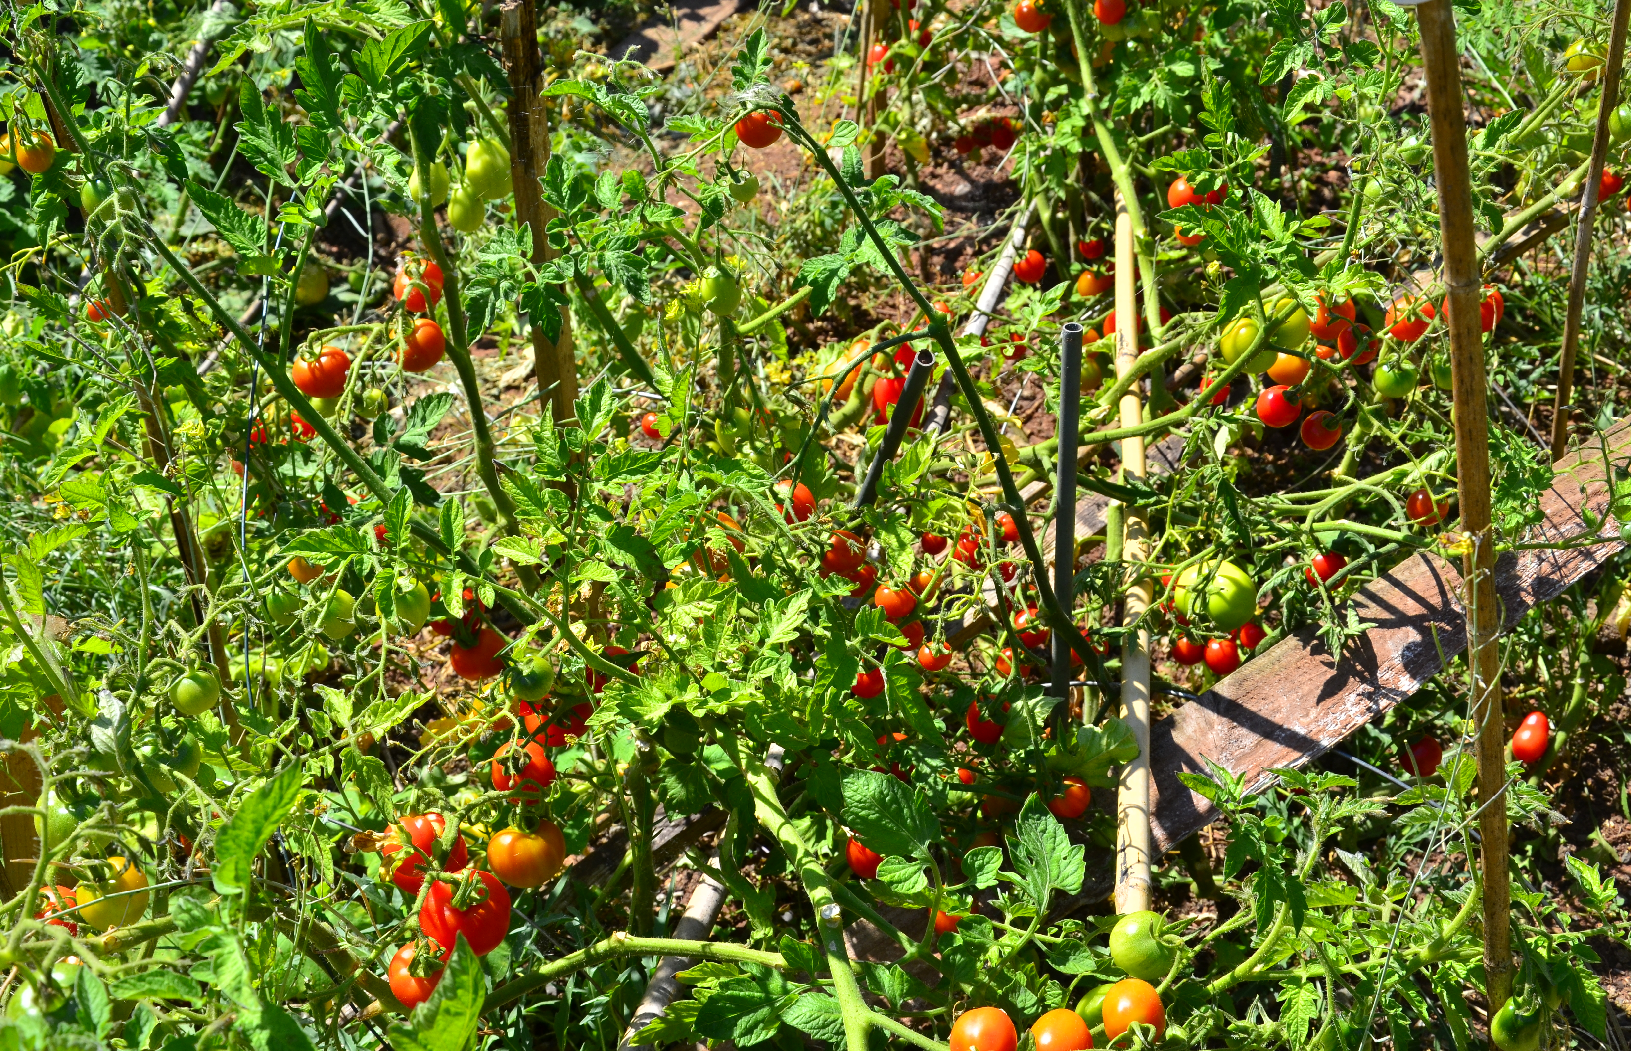 Ripening tomatoes in the garden